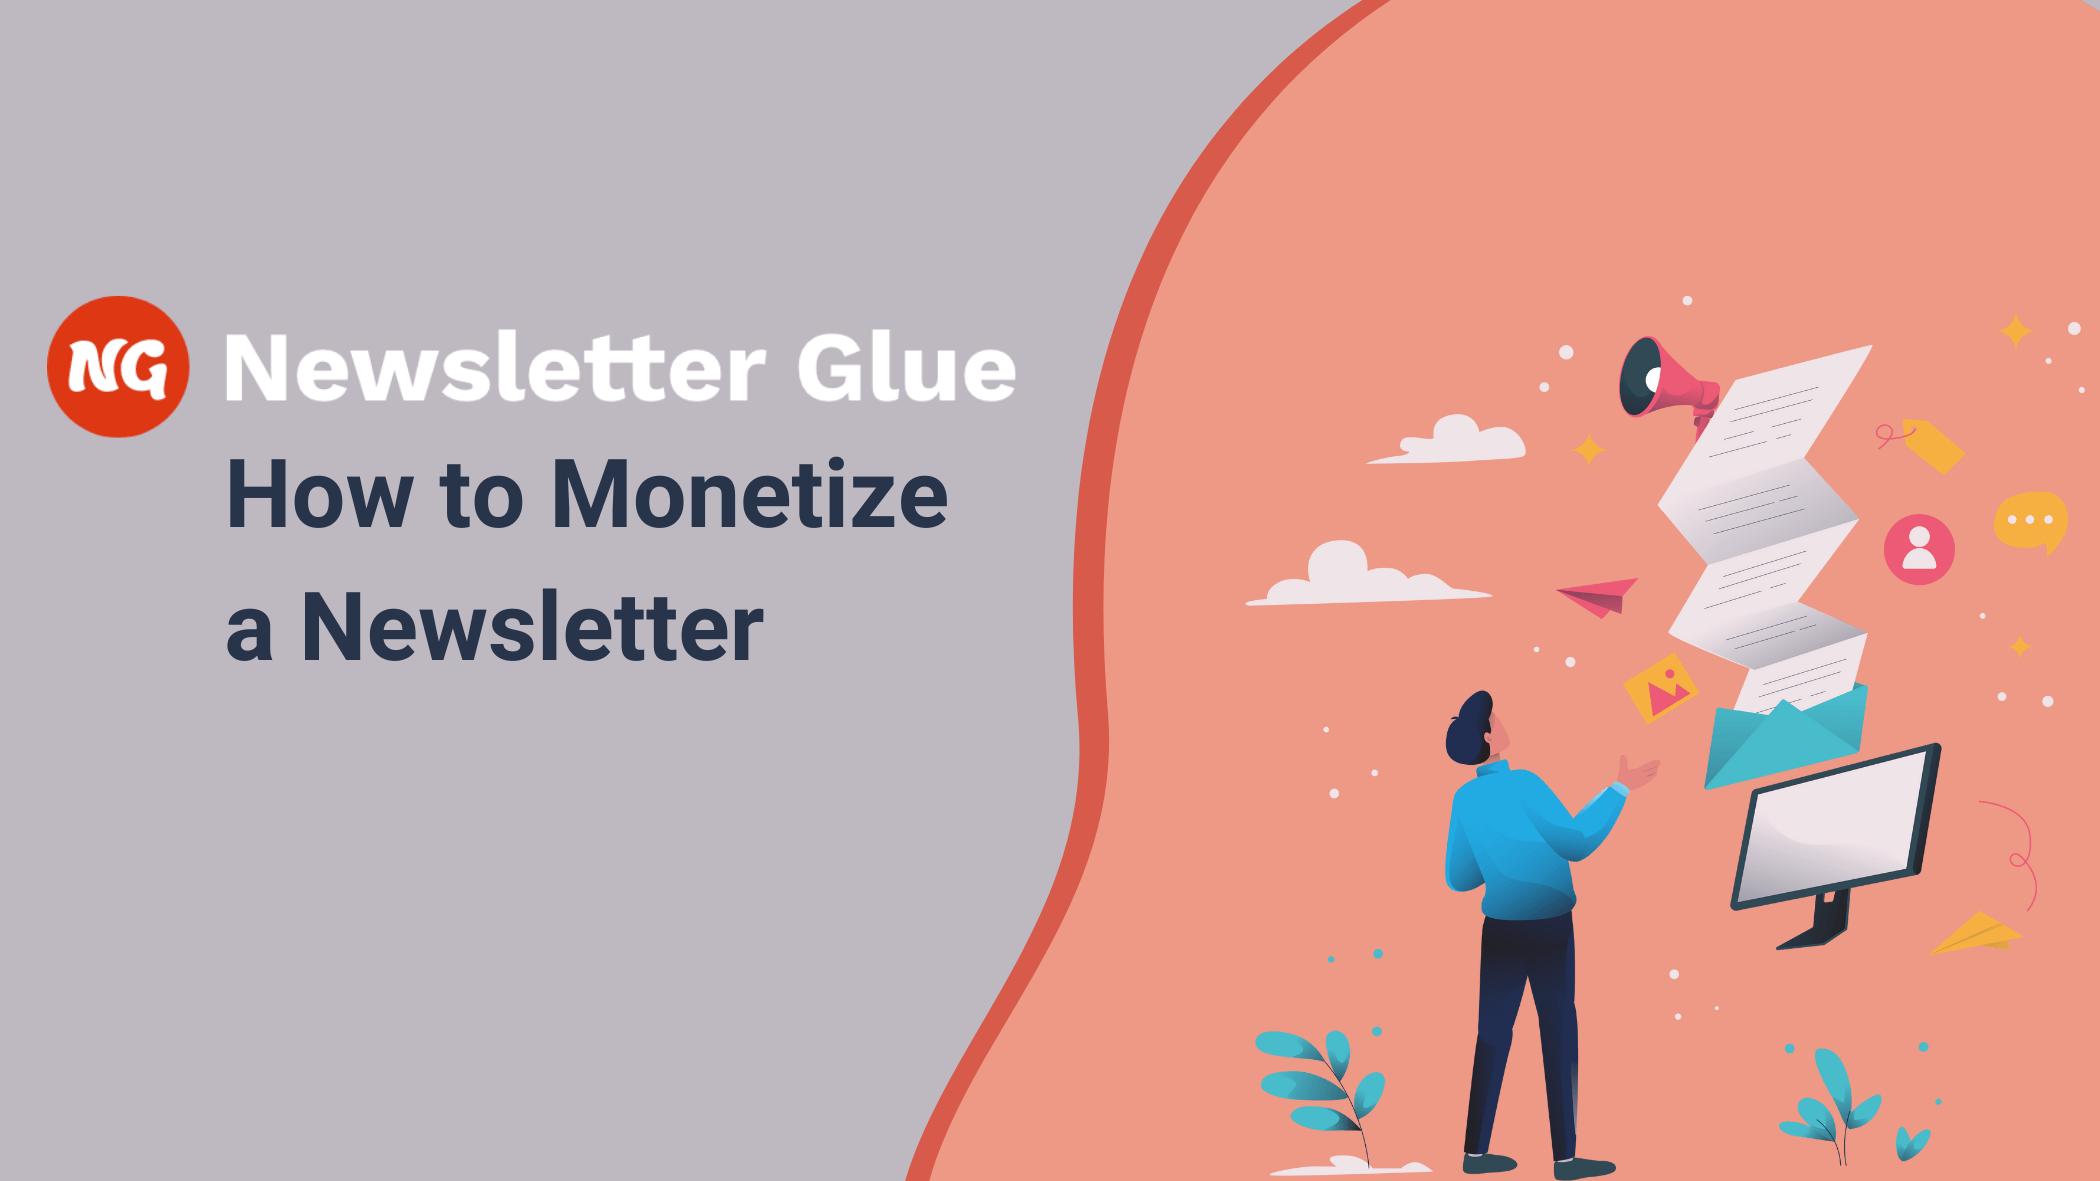 Newsletter Glue logo, top left with subtitle "How to Monetize a Newsletter". On the right, an illustrated image of a person looking at a computer screen with emails and icons floating above it.